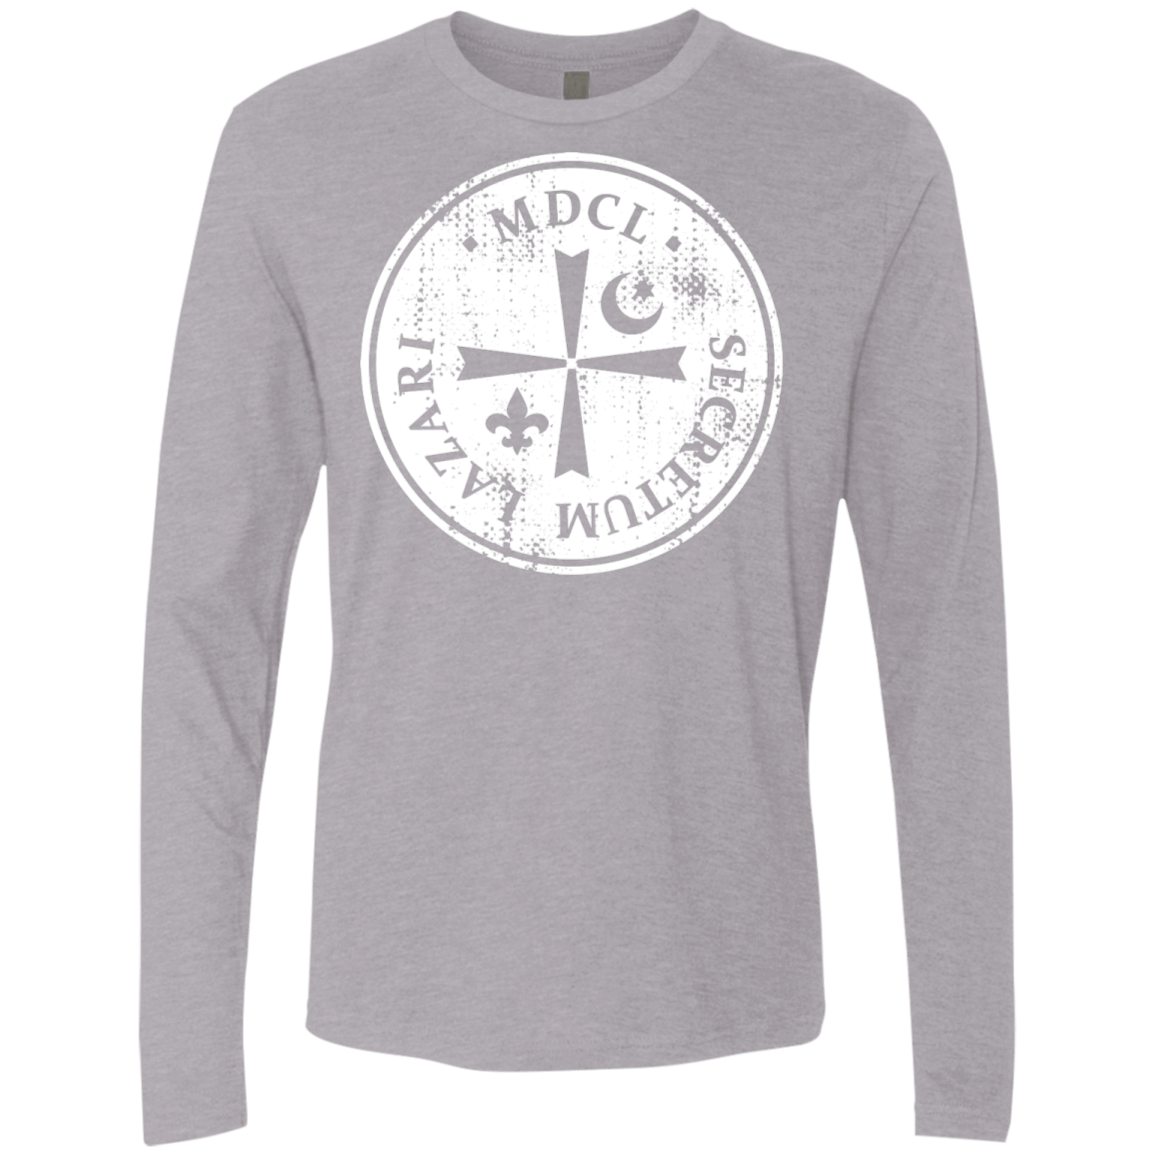 T-Shirts Heather Grey / S A Discovery Of Witches Men's Premium Long Sleeve